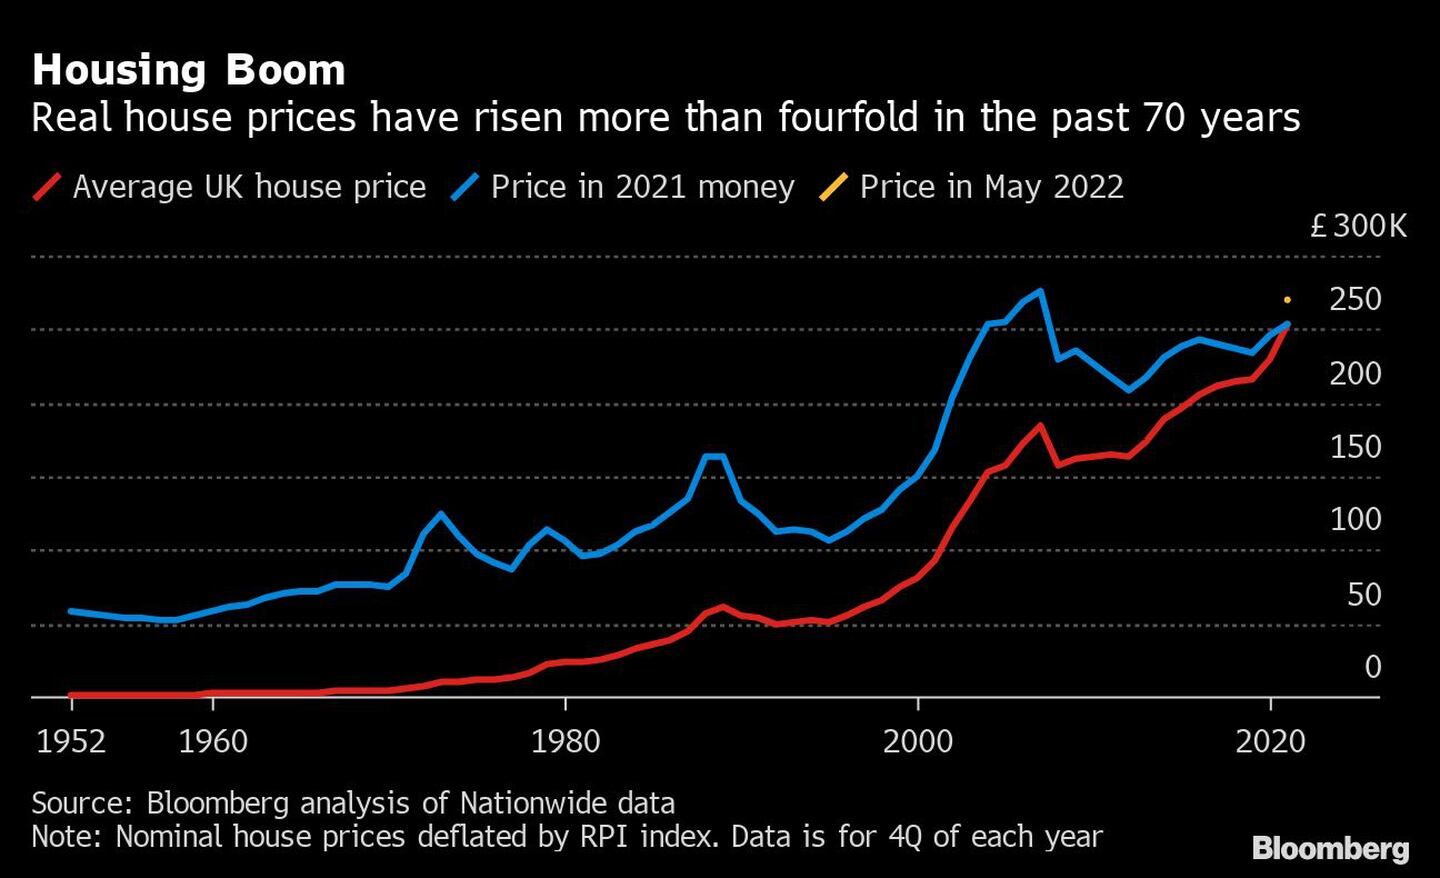 Housing Boom | Real house prices have risen more than fourfold in the past 70 yearsdfd